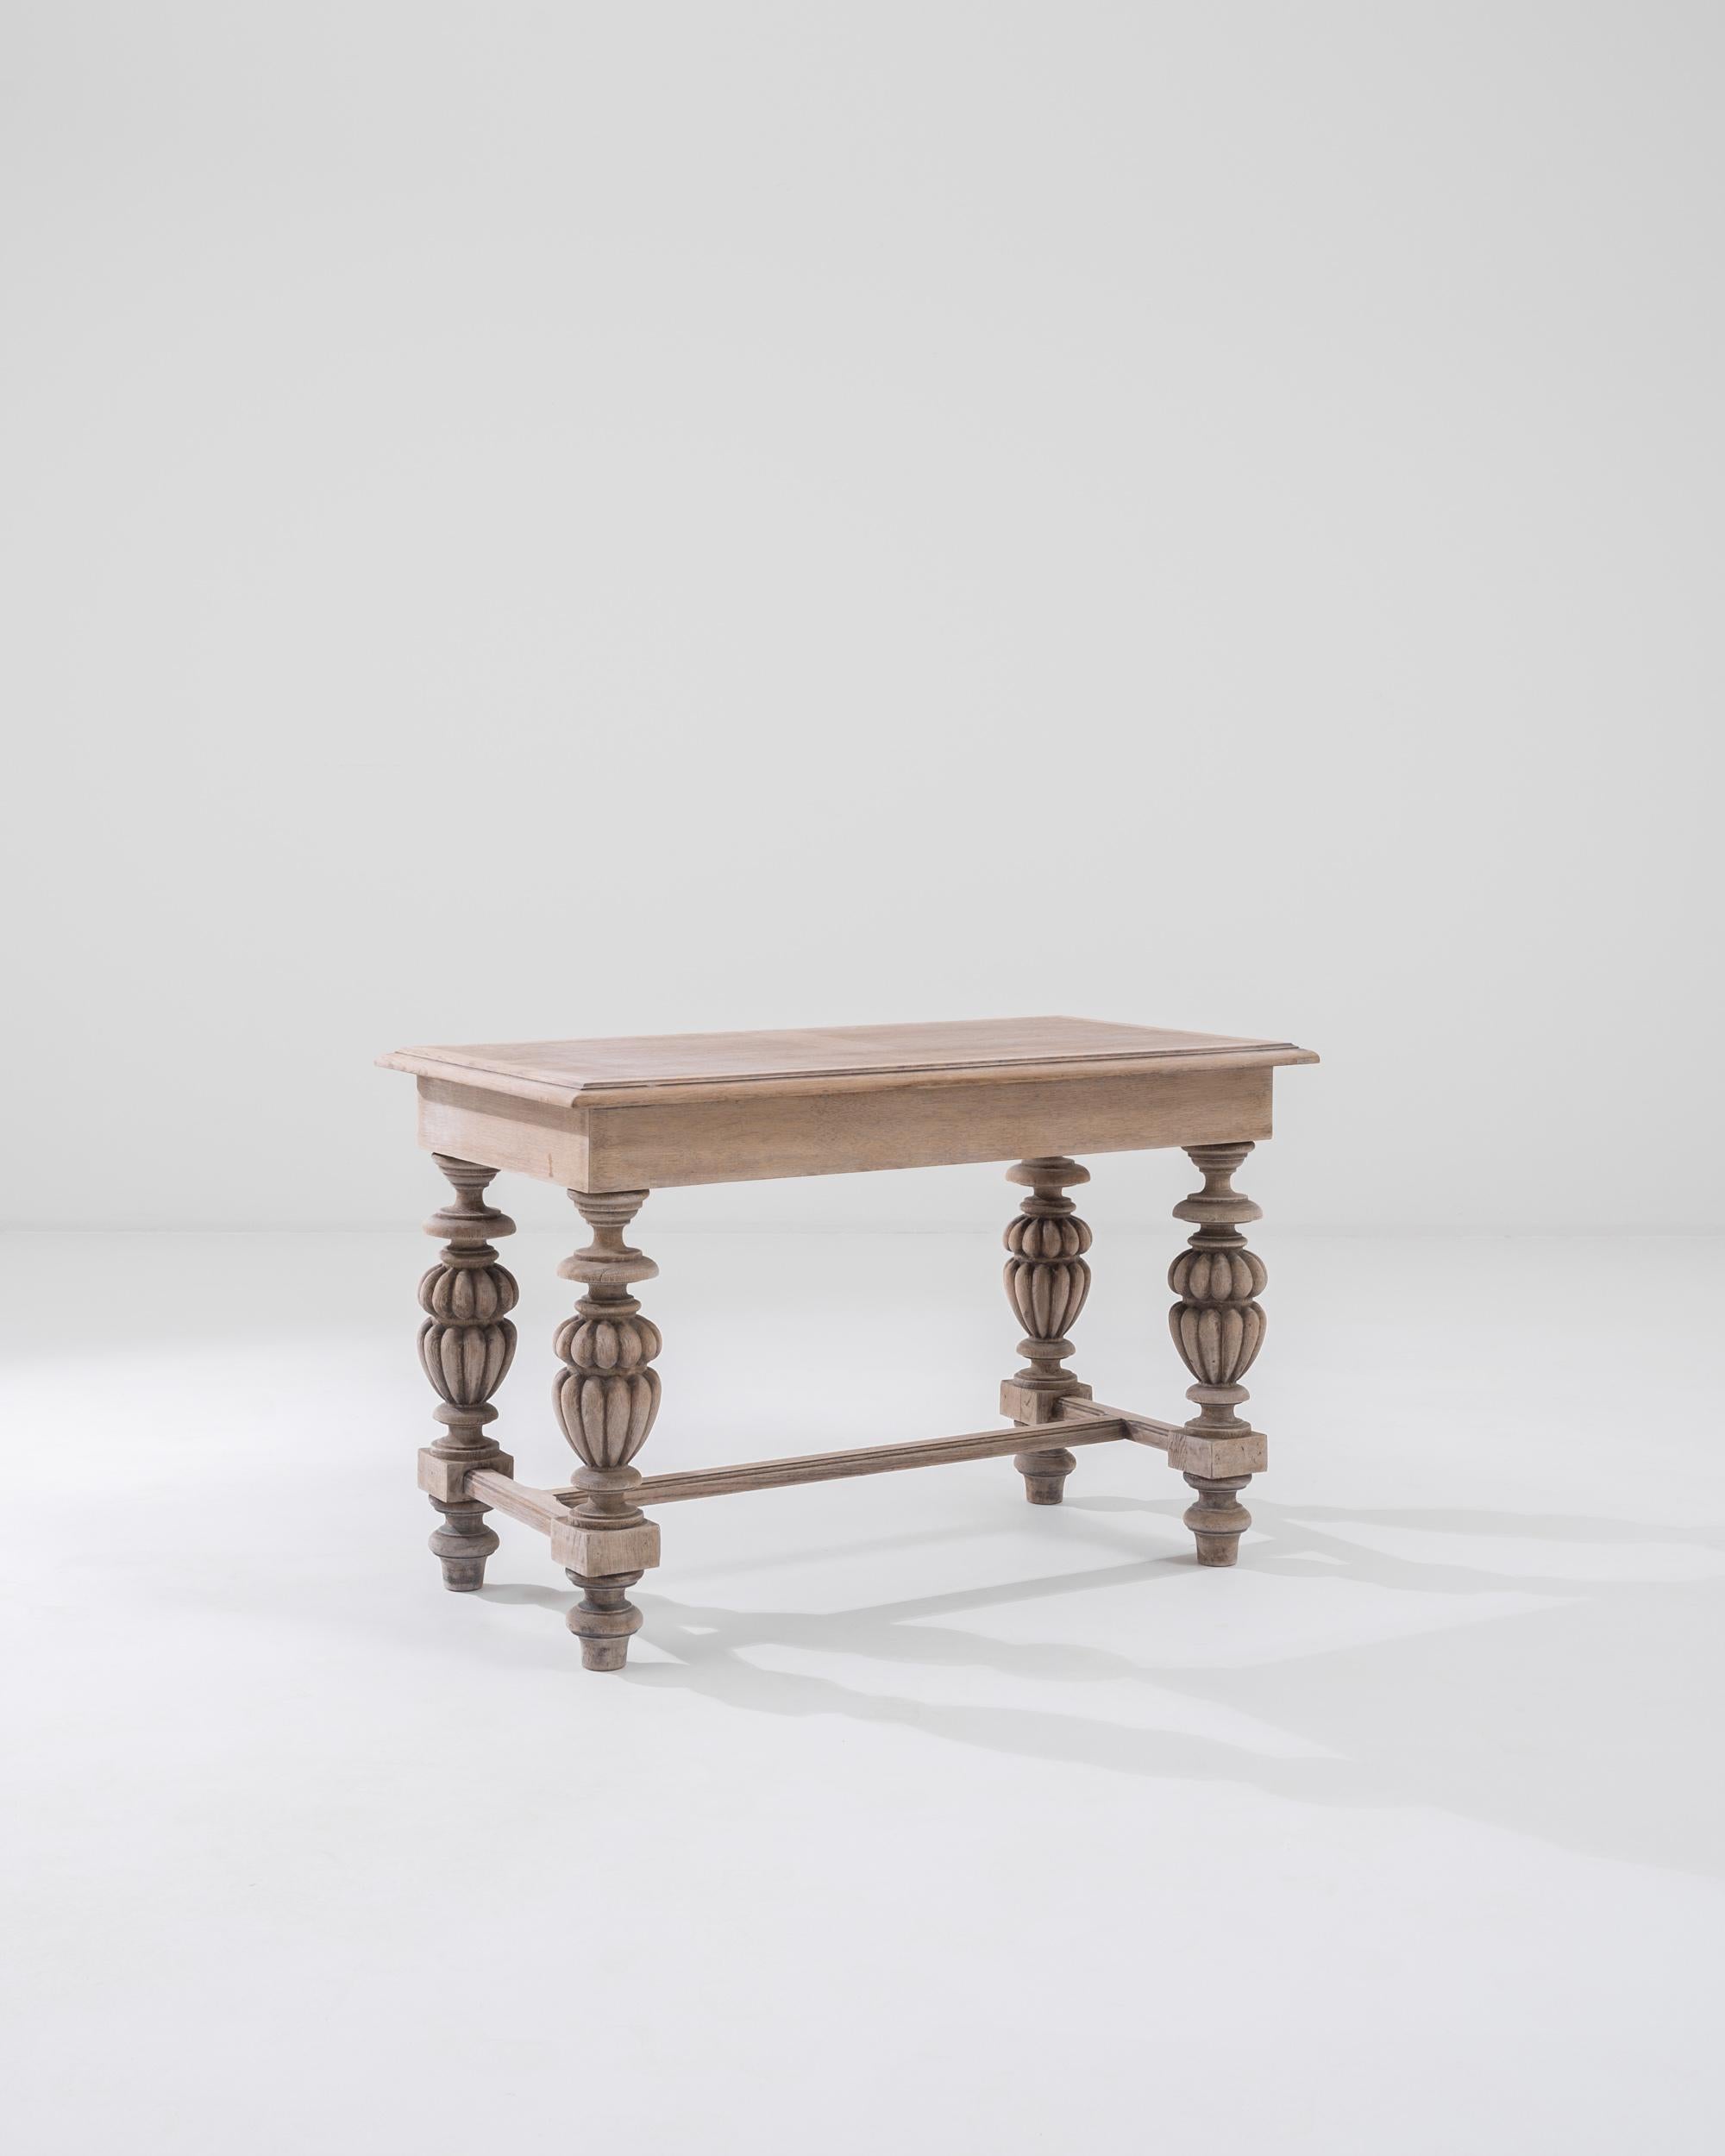 A 20th century coffee table produced in Belgium, this blooming piece comprises a rectangular top balanced upon lavishly turned legs. Meticulously crafted, the cucurbits-like legs offer a generous contrast to the otherwise upright frame and